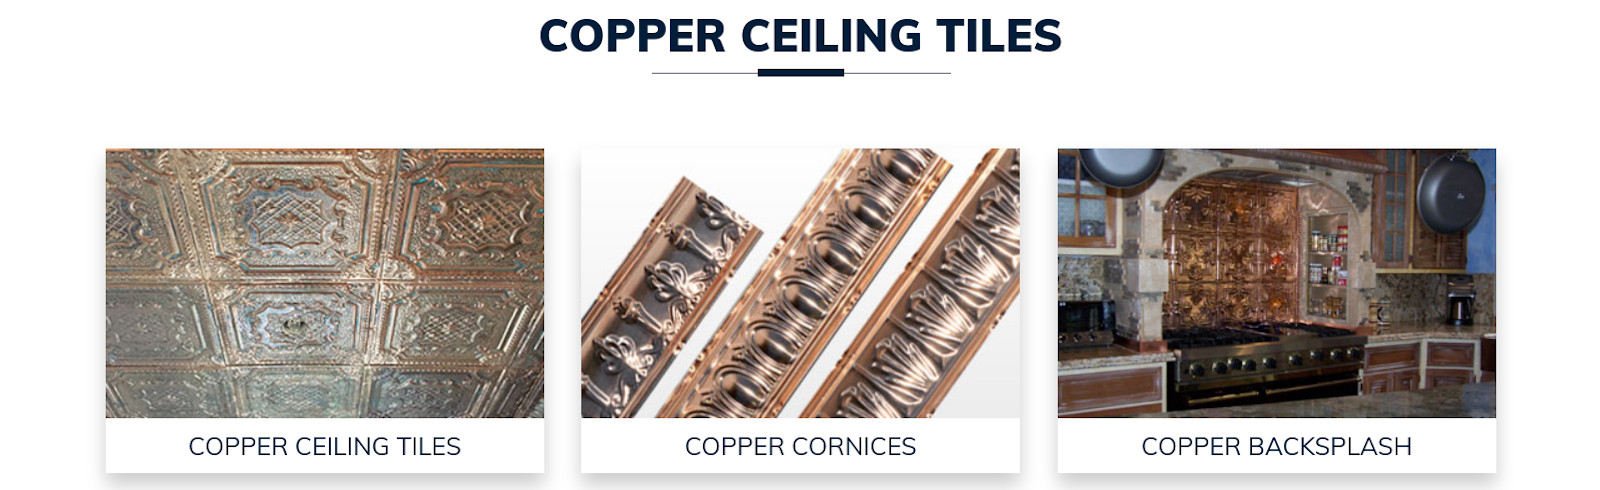 copper ceiling tiles affordable price